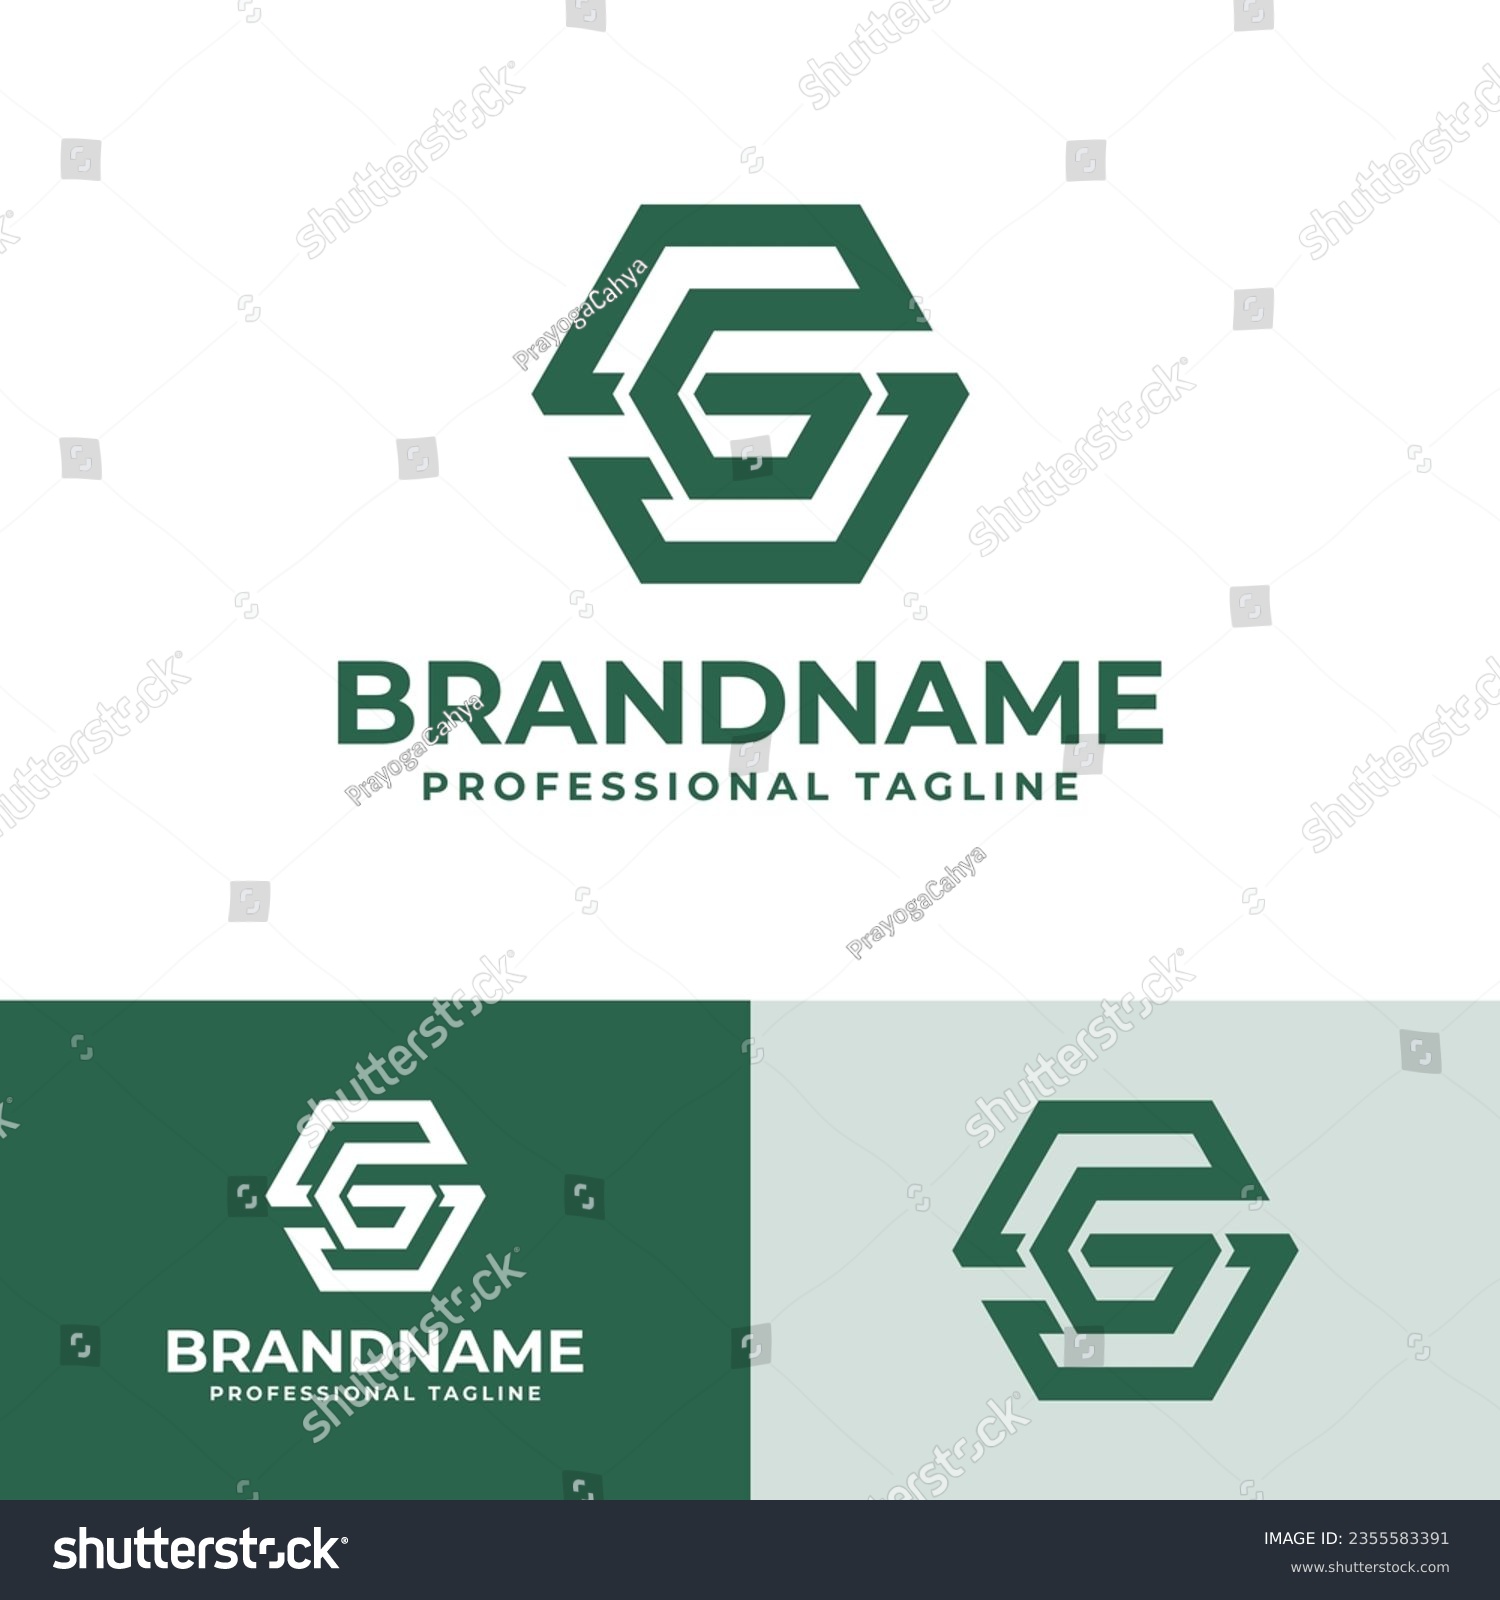 SVG of Letter SG Arrow Hexagonal Logo, suitable for any business related to Hexagonal with SG or GS initial. svg